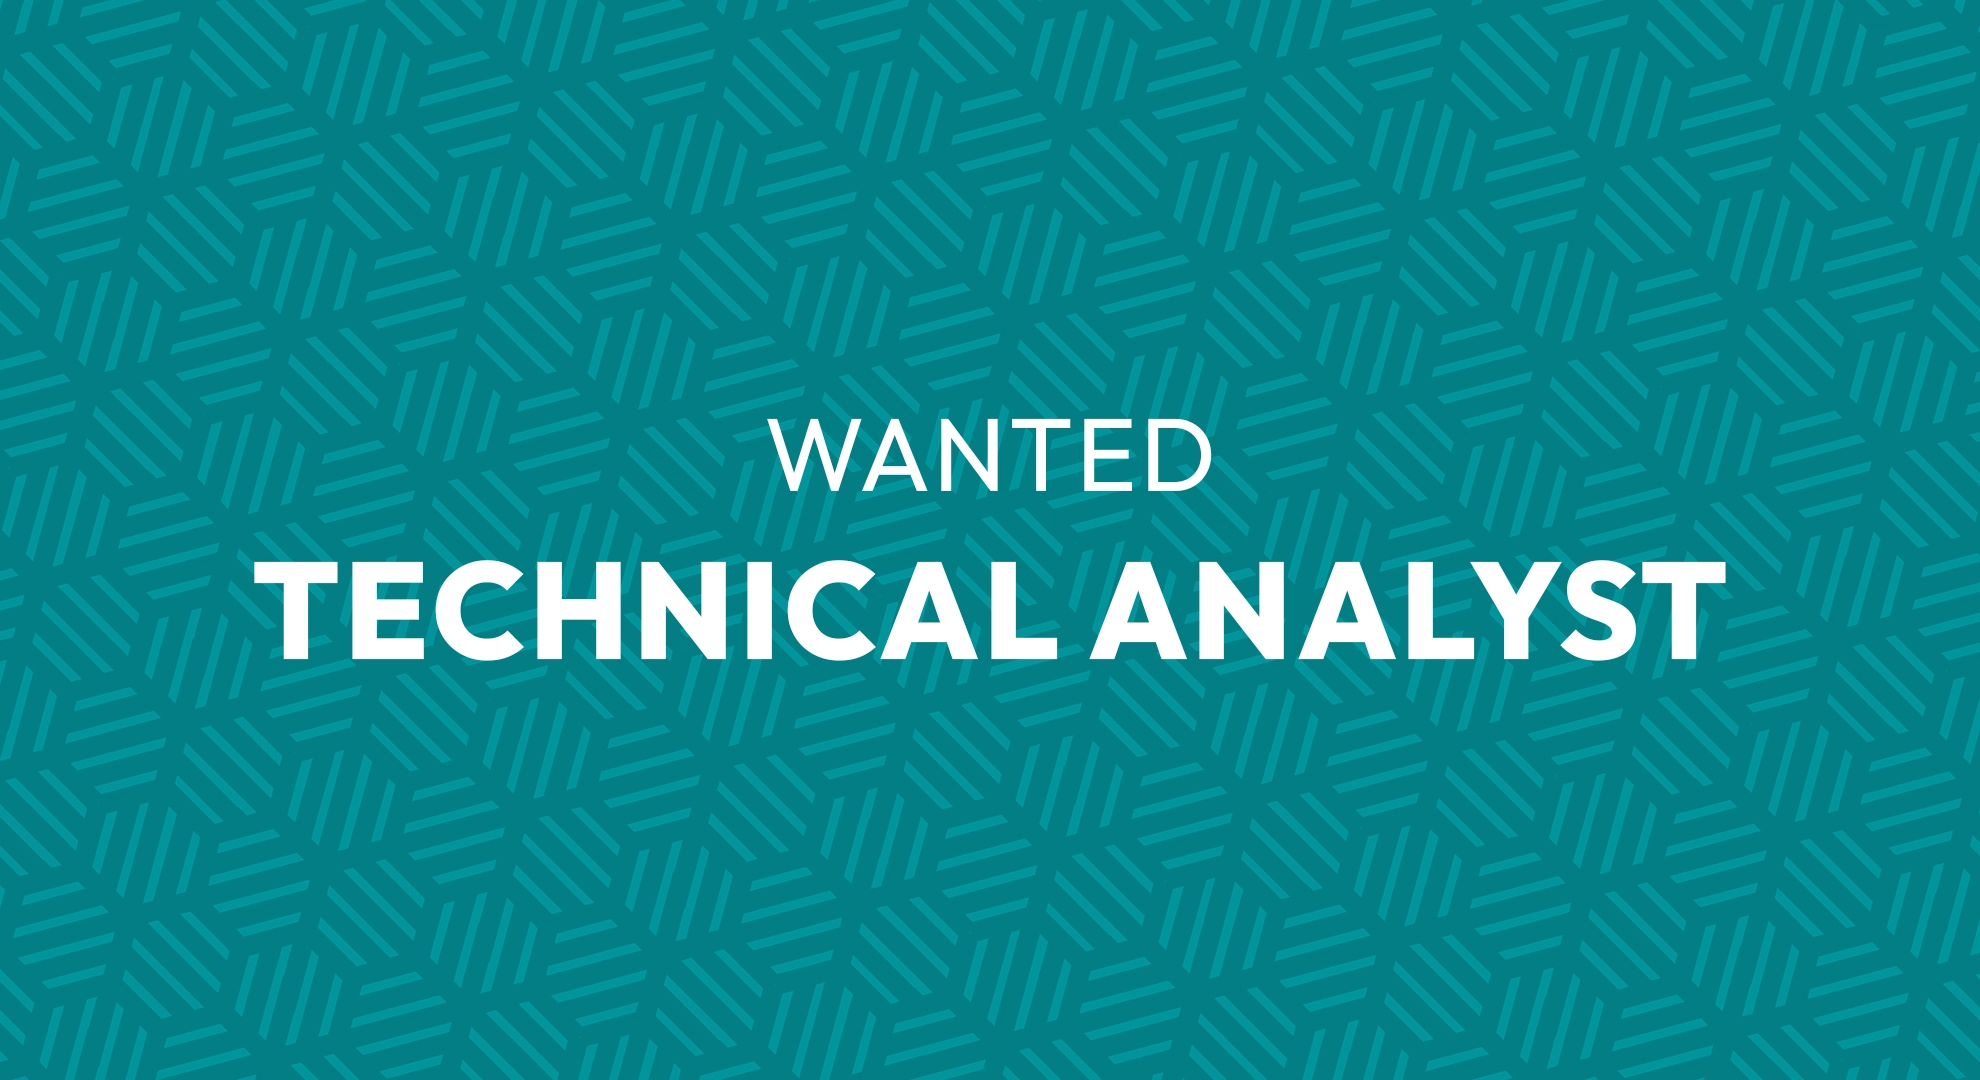 Job Opportunity: Technical Analyst